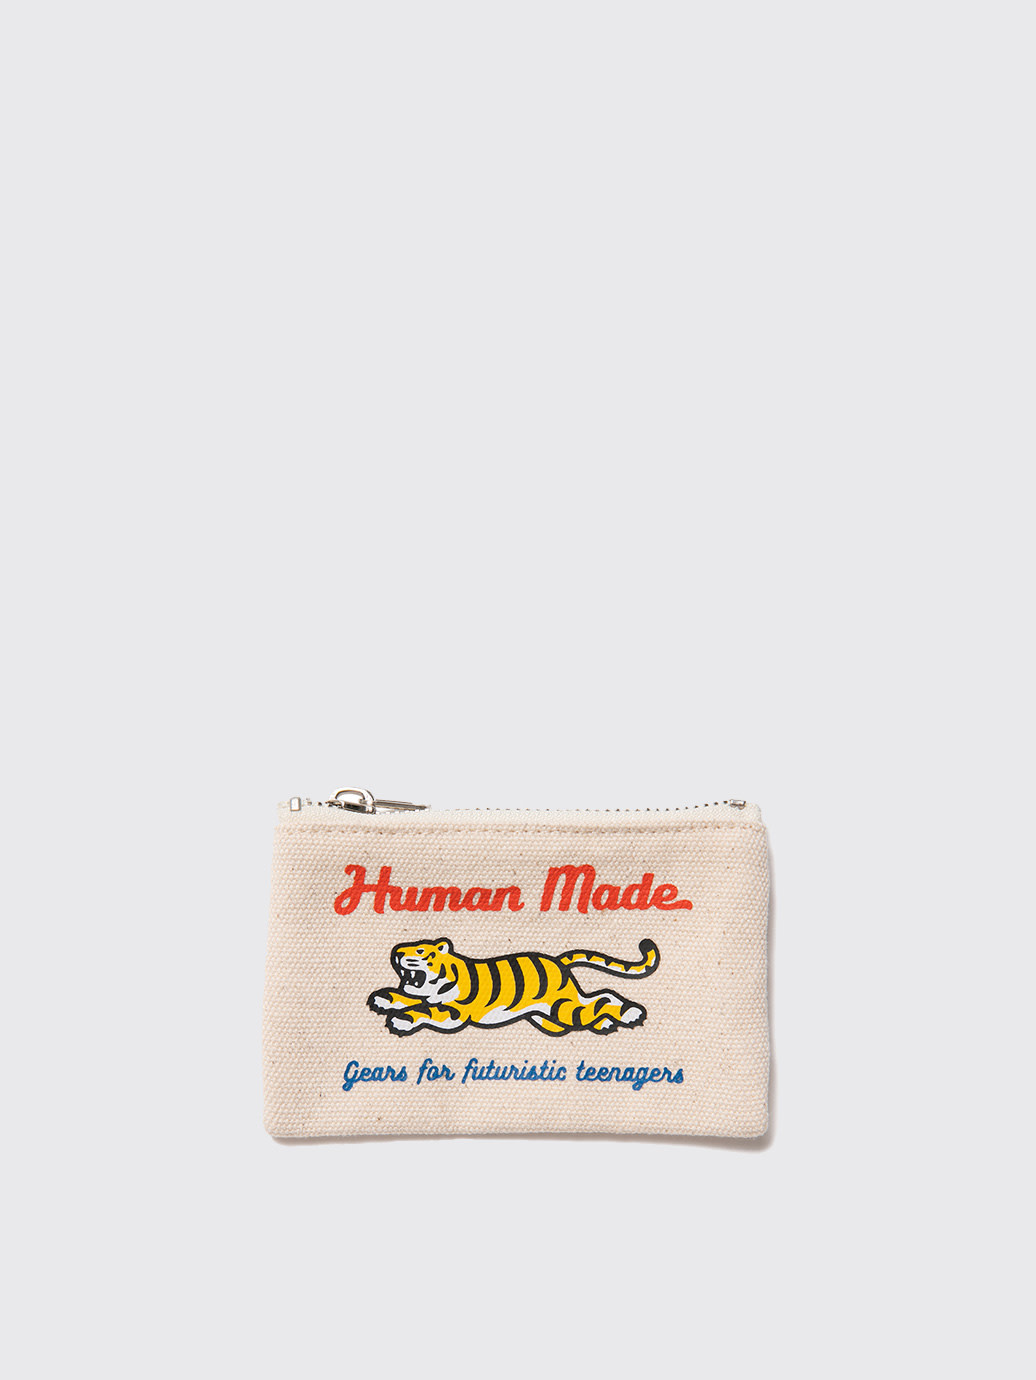 HUMAN MADE DOUBLE SIDED TISSUE CASE 新品 - ティッシュボックス